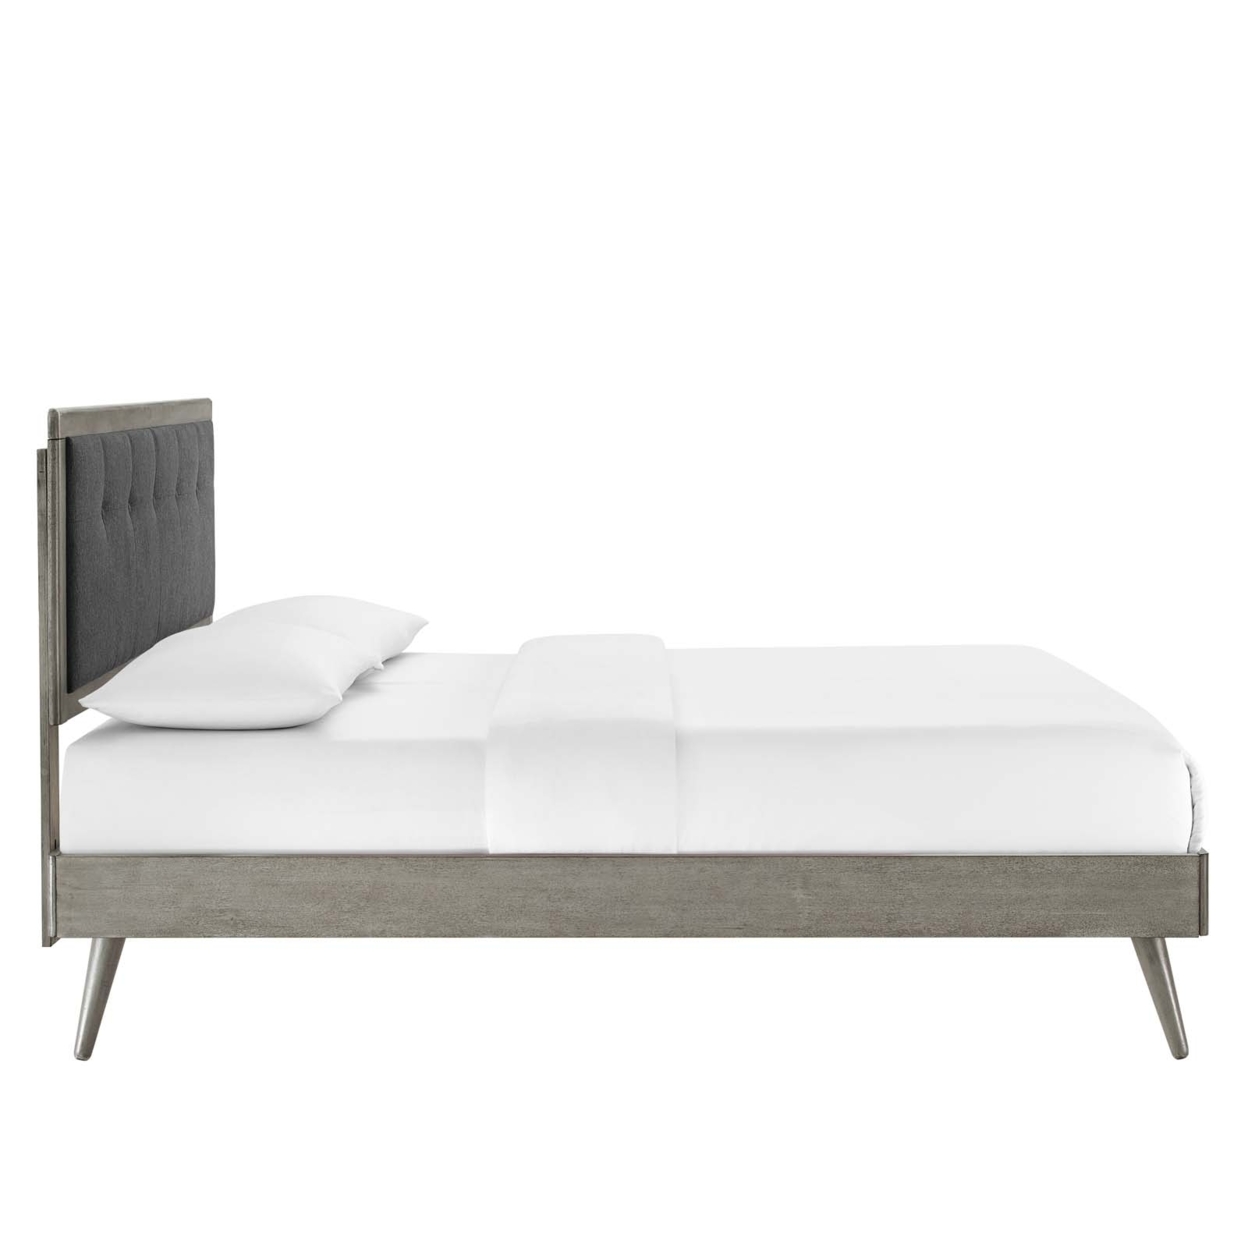 Willow Full Wood Platform Bed With Splayed Legs, Gray Charcoal